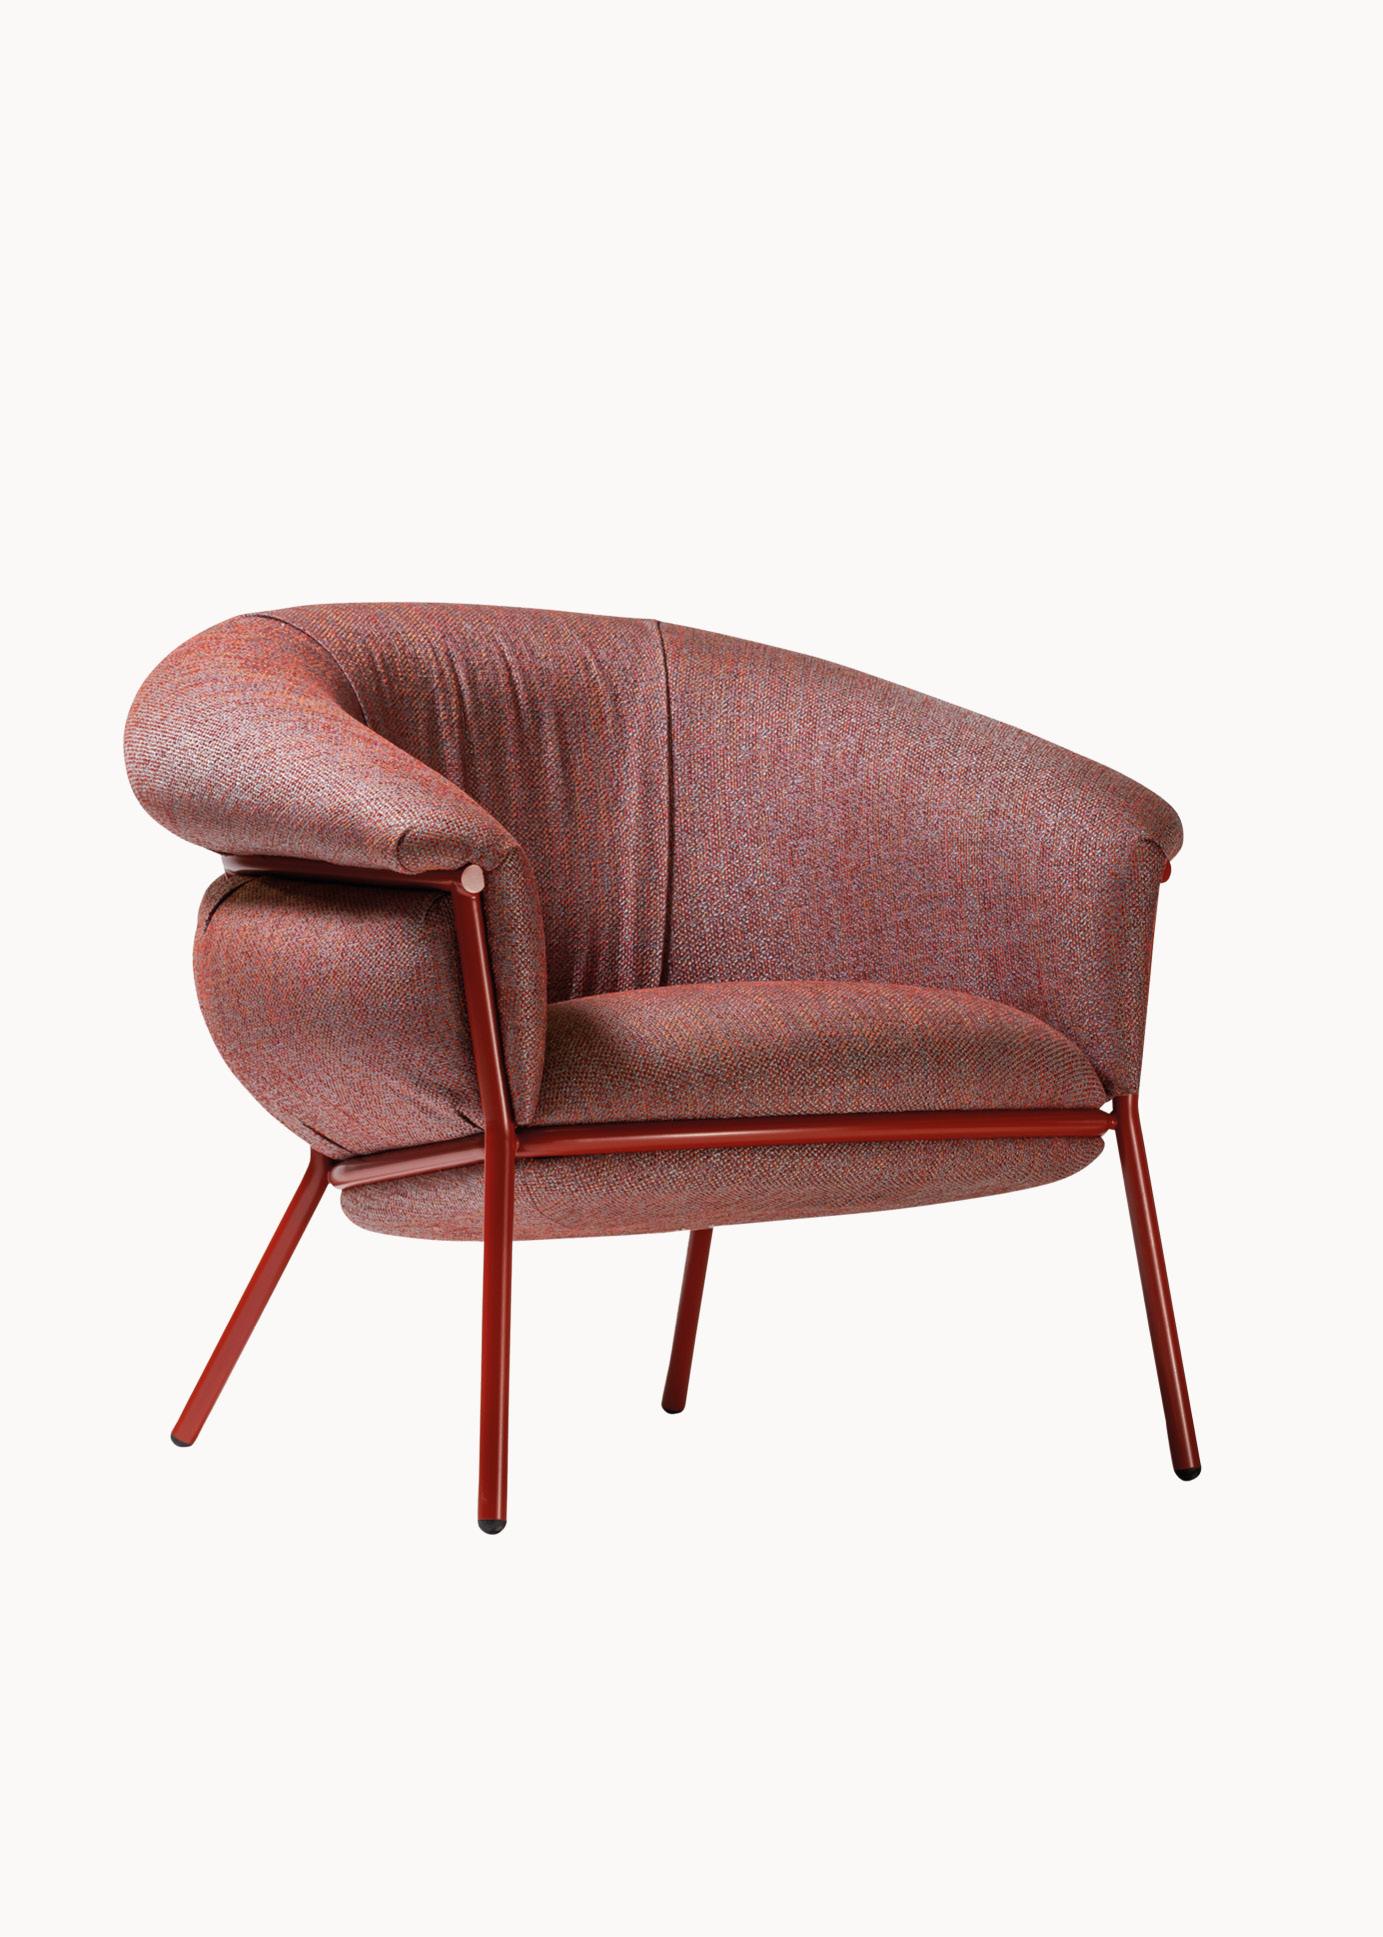 “Grasso is not fat. Grasso is more than fat. It’s overflowing.” This is how Stephen Burks sums up his collection for BD. An armchair that pursues “ultra-comfort”, and invites you to sit on it. The leather upholstery oozes over the bare iron